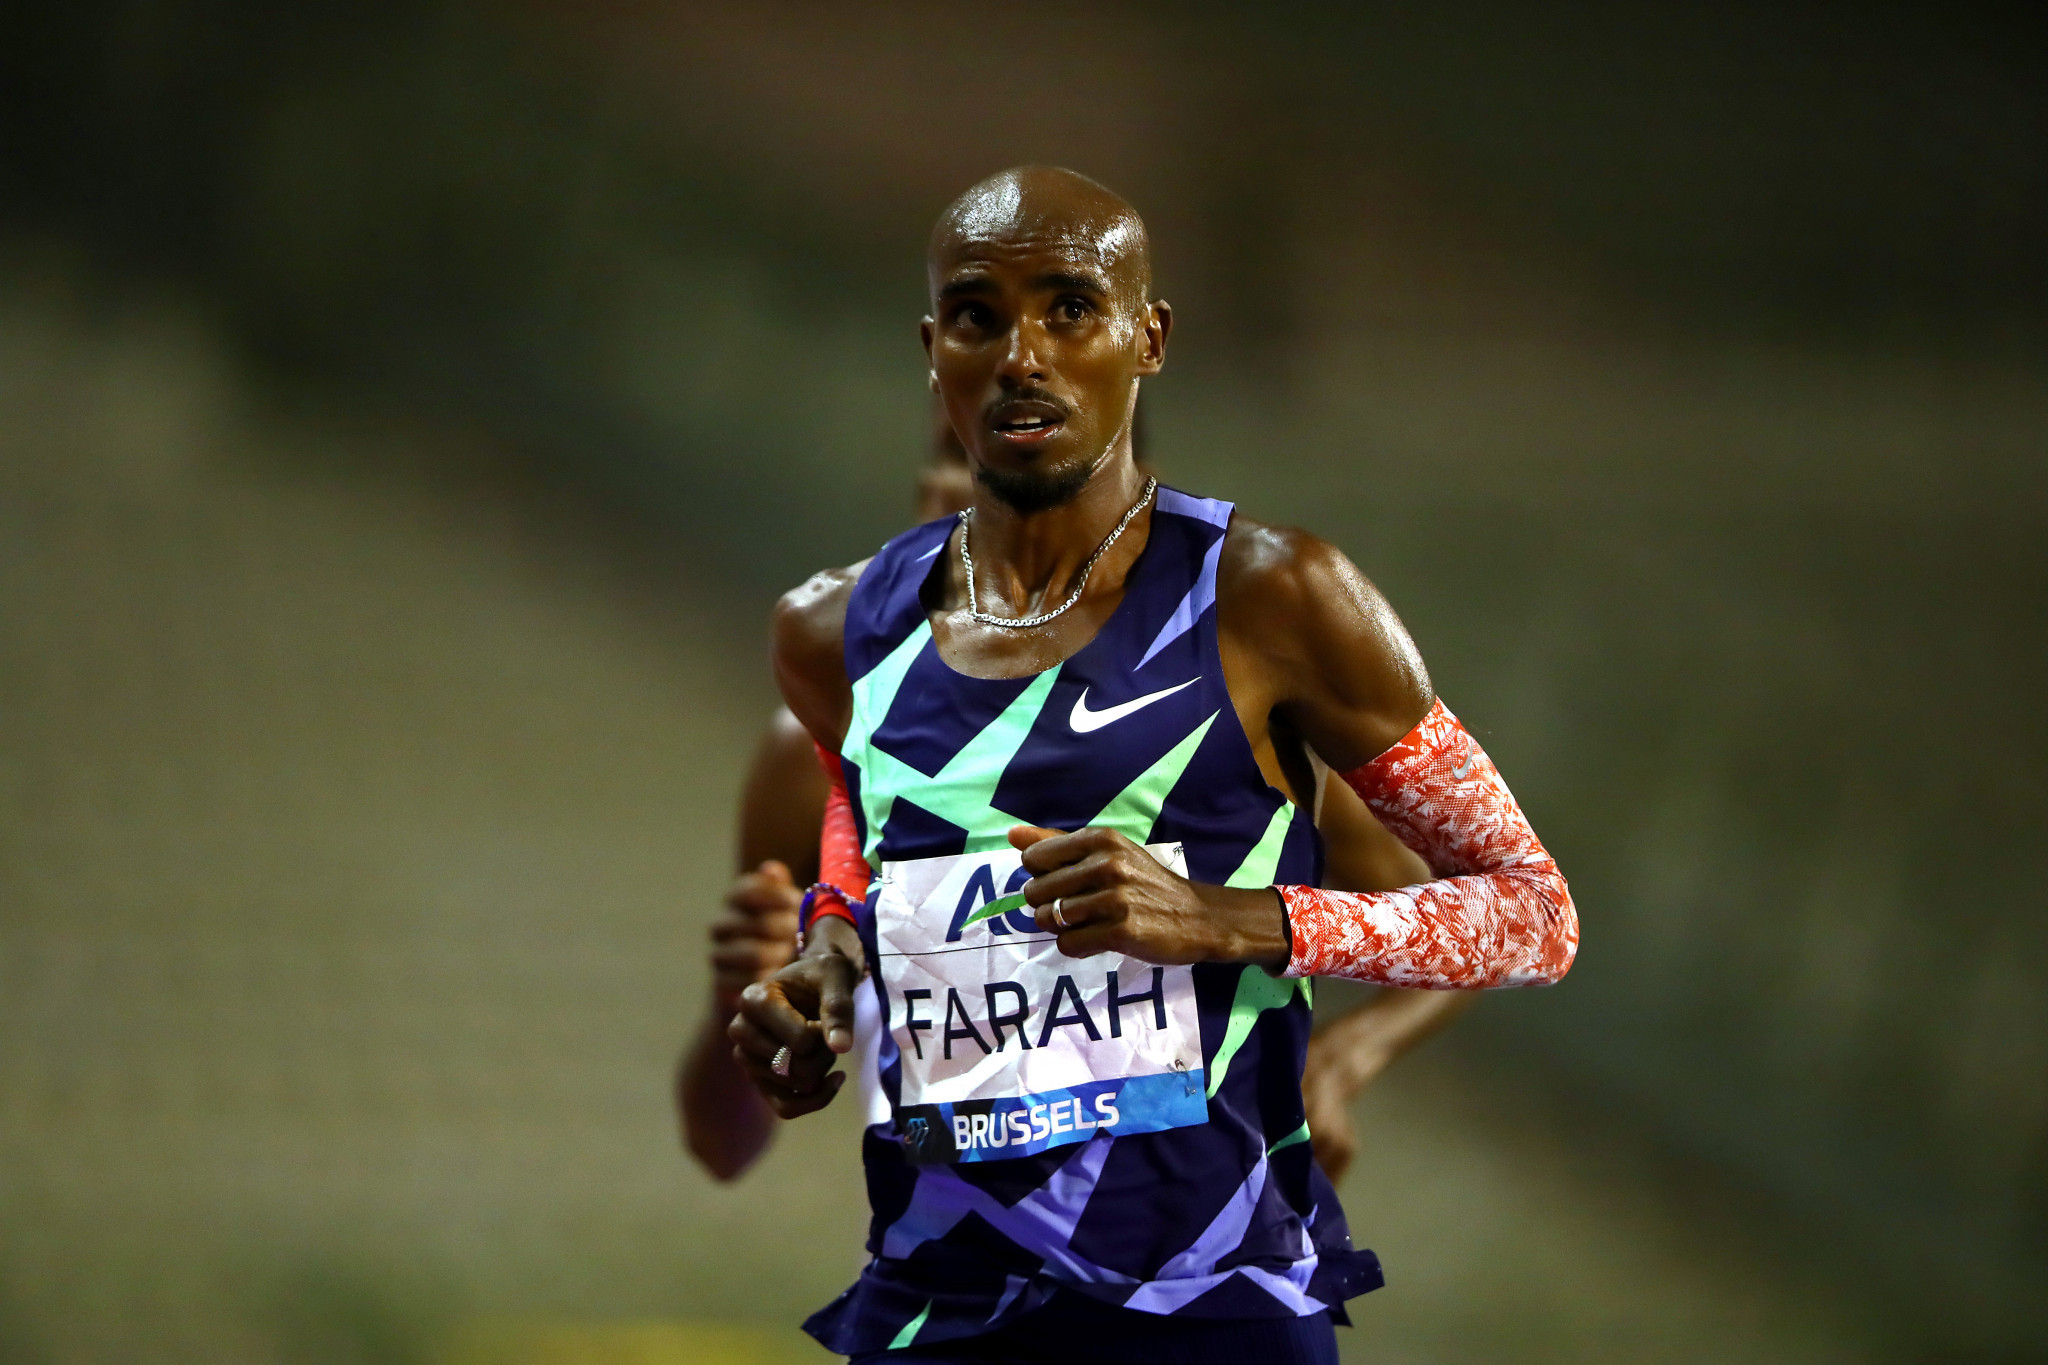 Farah to get another shot at 10,000m Olympic standard at British Athletics Championships